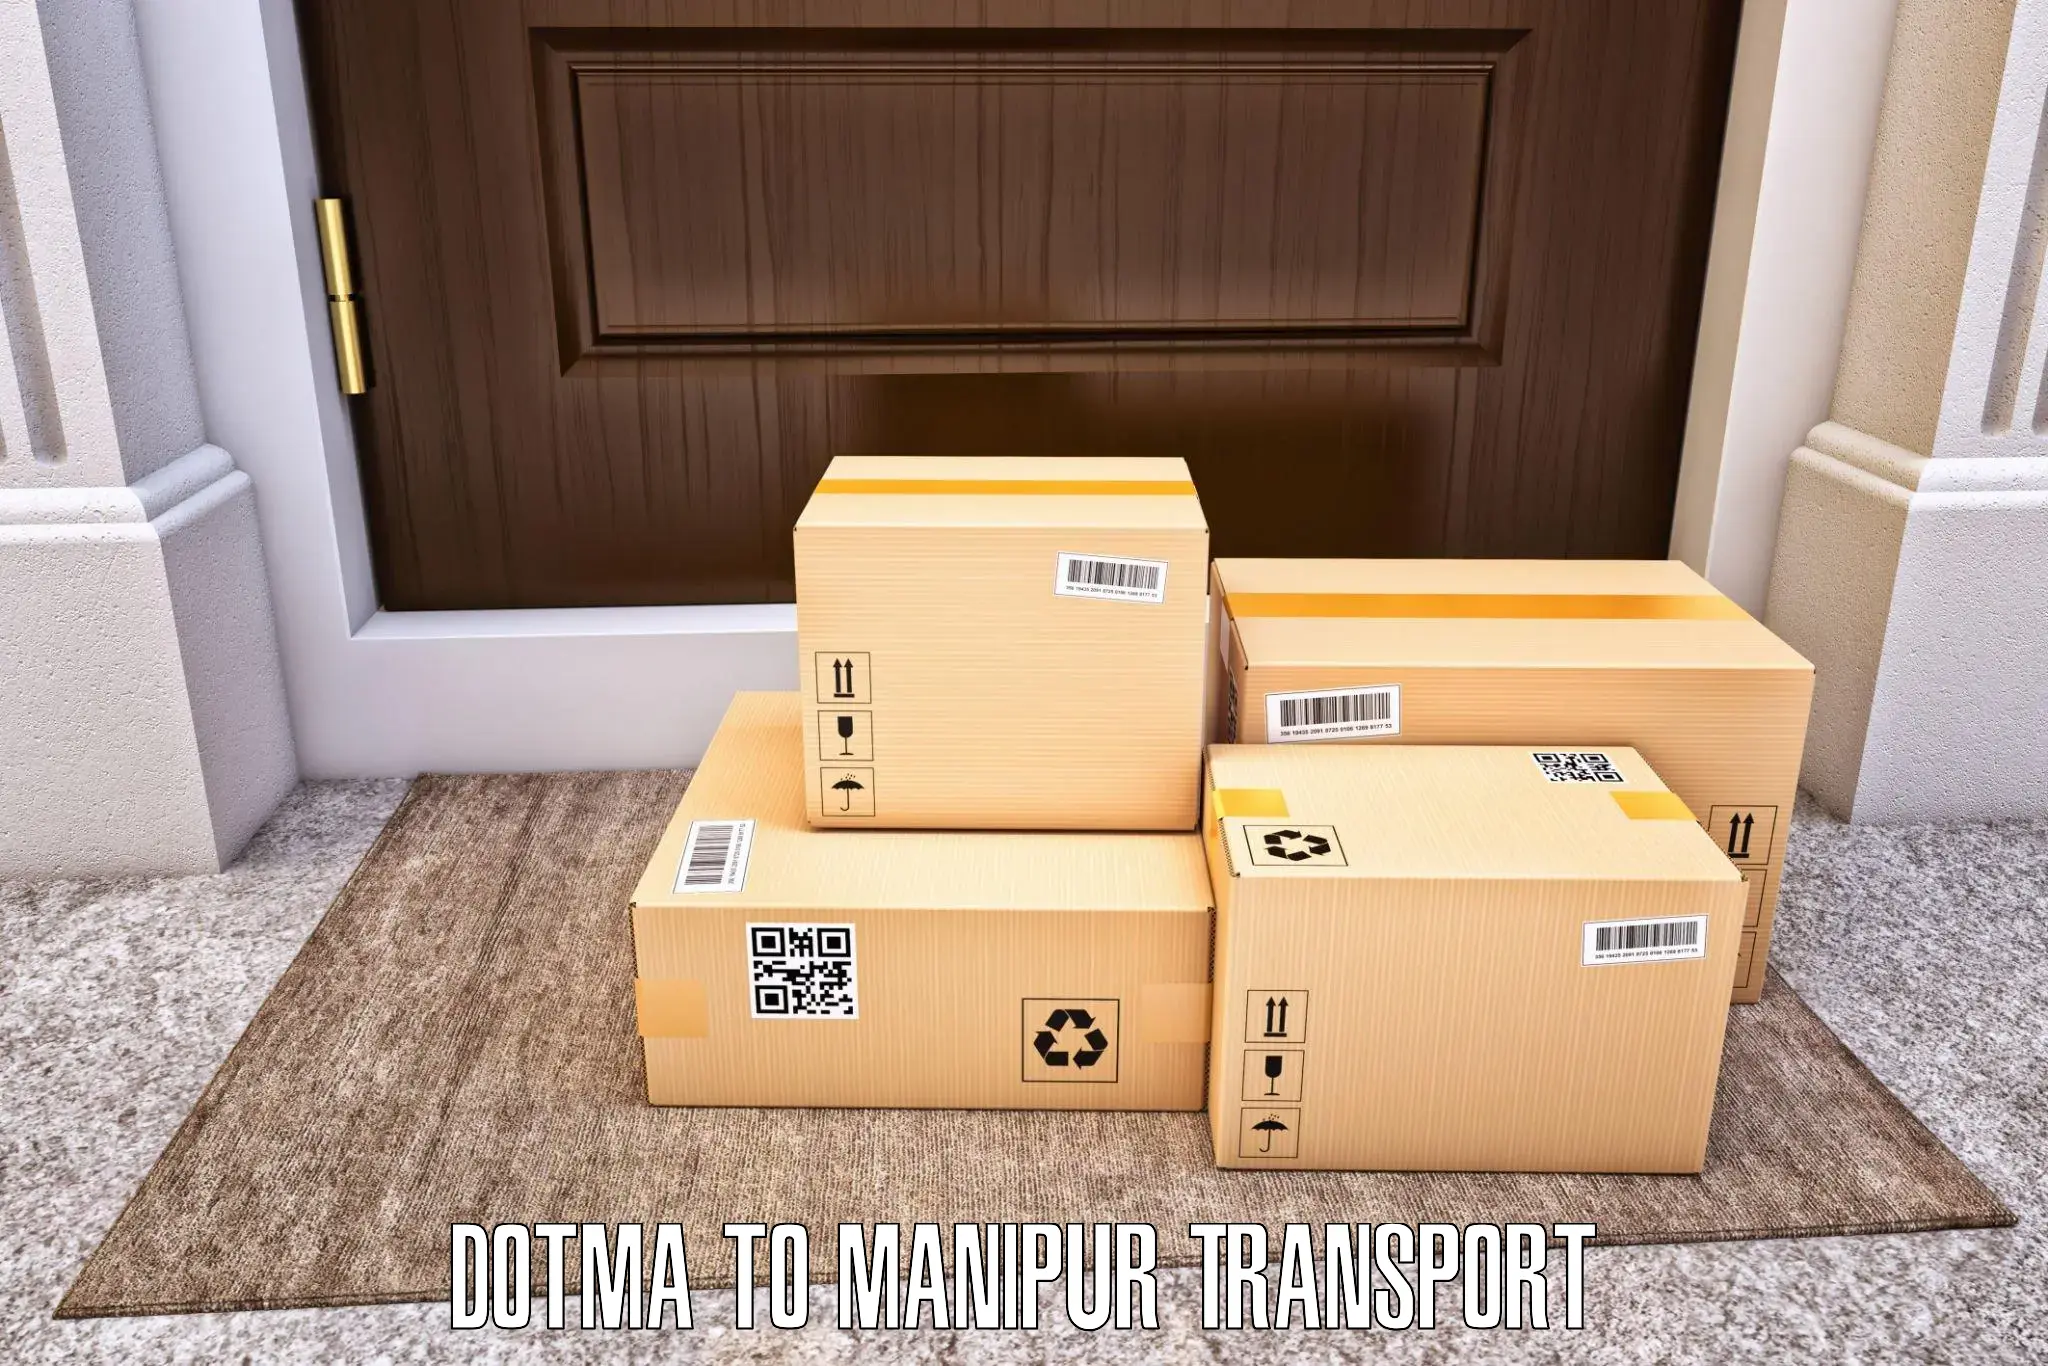 Nationwide transport services Dotma to Manipur